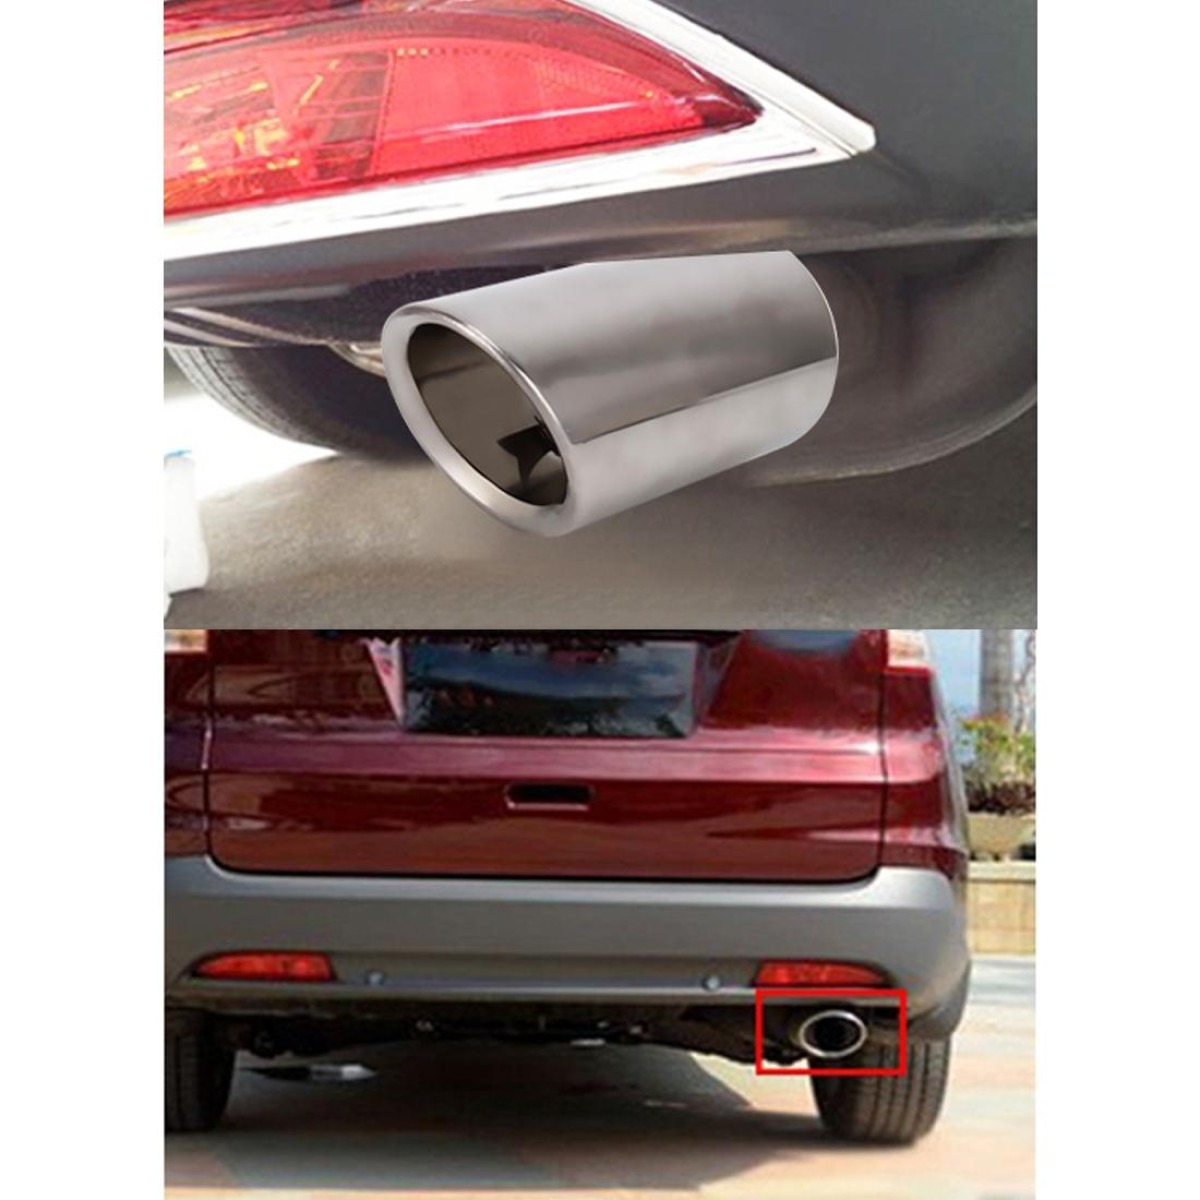 2 PCS Car Styling Stainless Steel Exhaust Tail Muffler Tip Pipe for VW Volkswagen 1.8T/2T Swept Volume, Audi A1/A3/A4L/Q3/Q5(Silver)